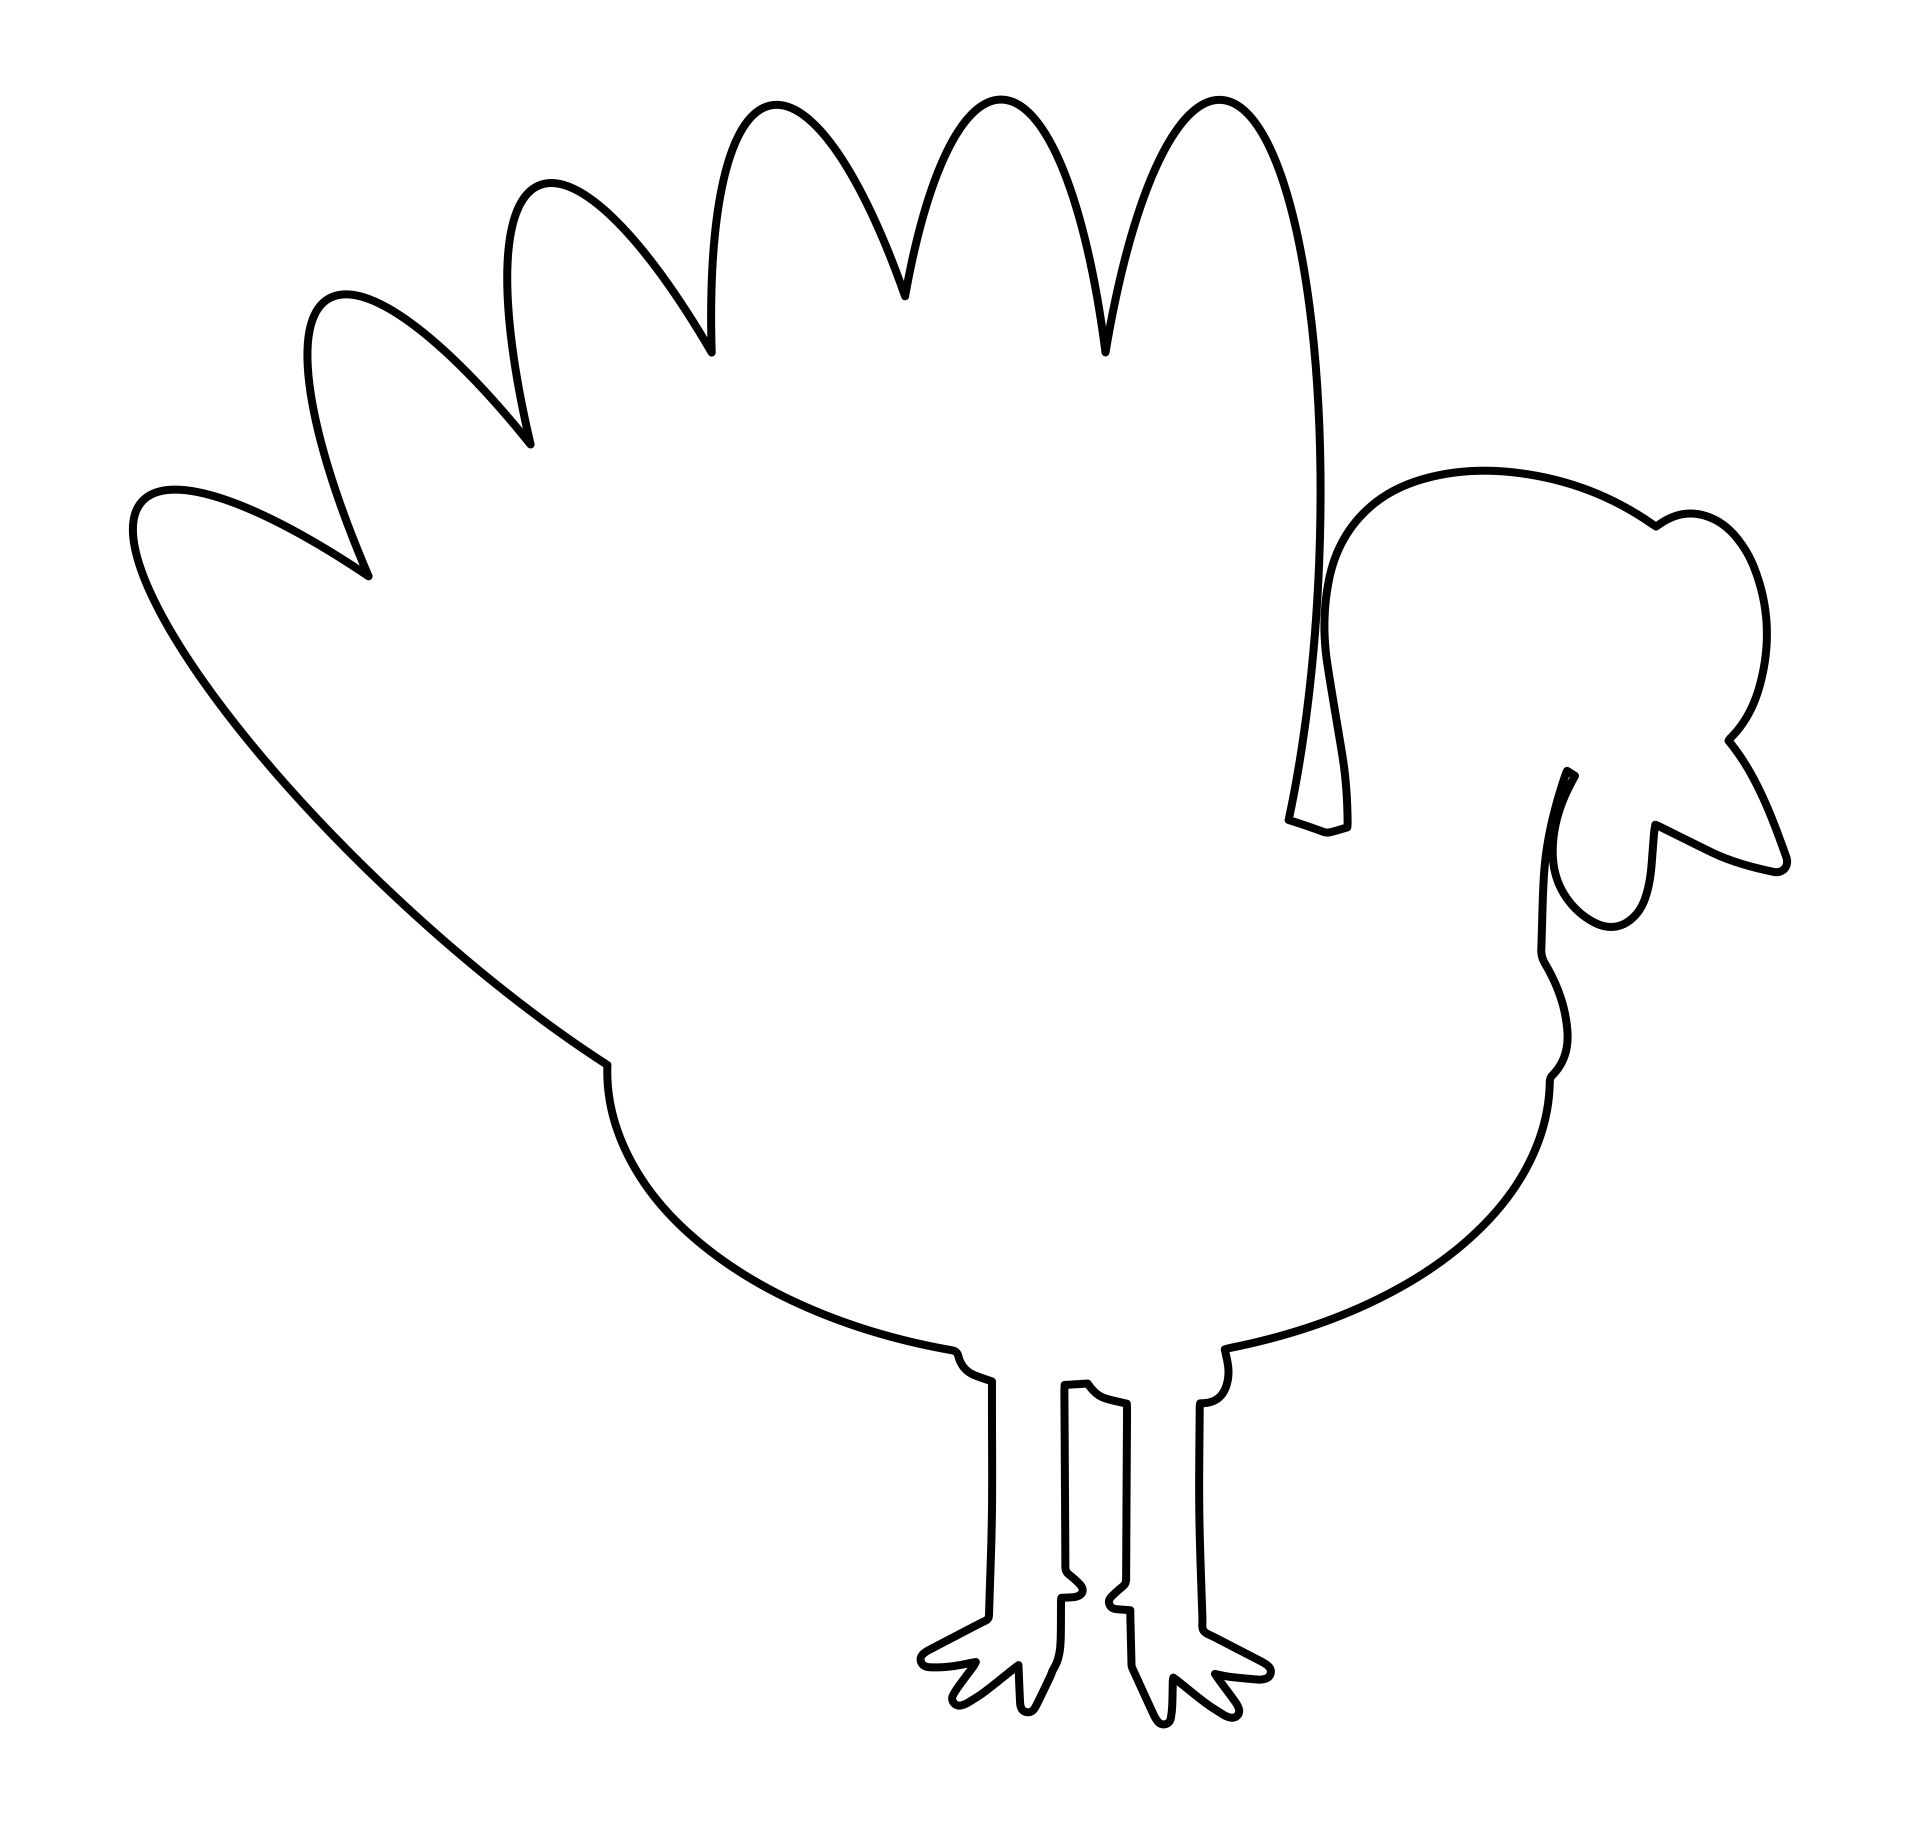 Turkey Cut Out Template